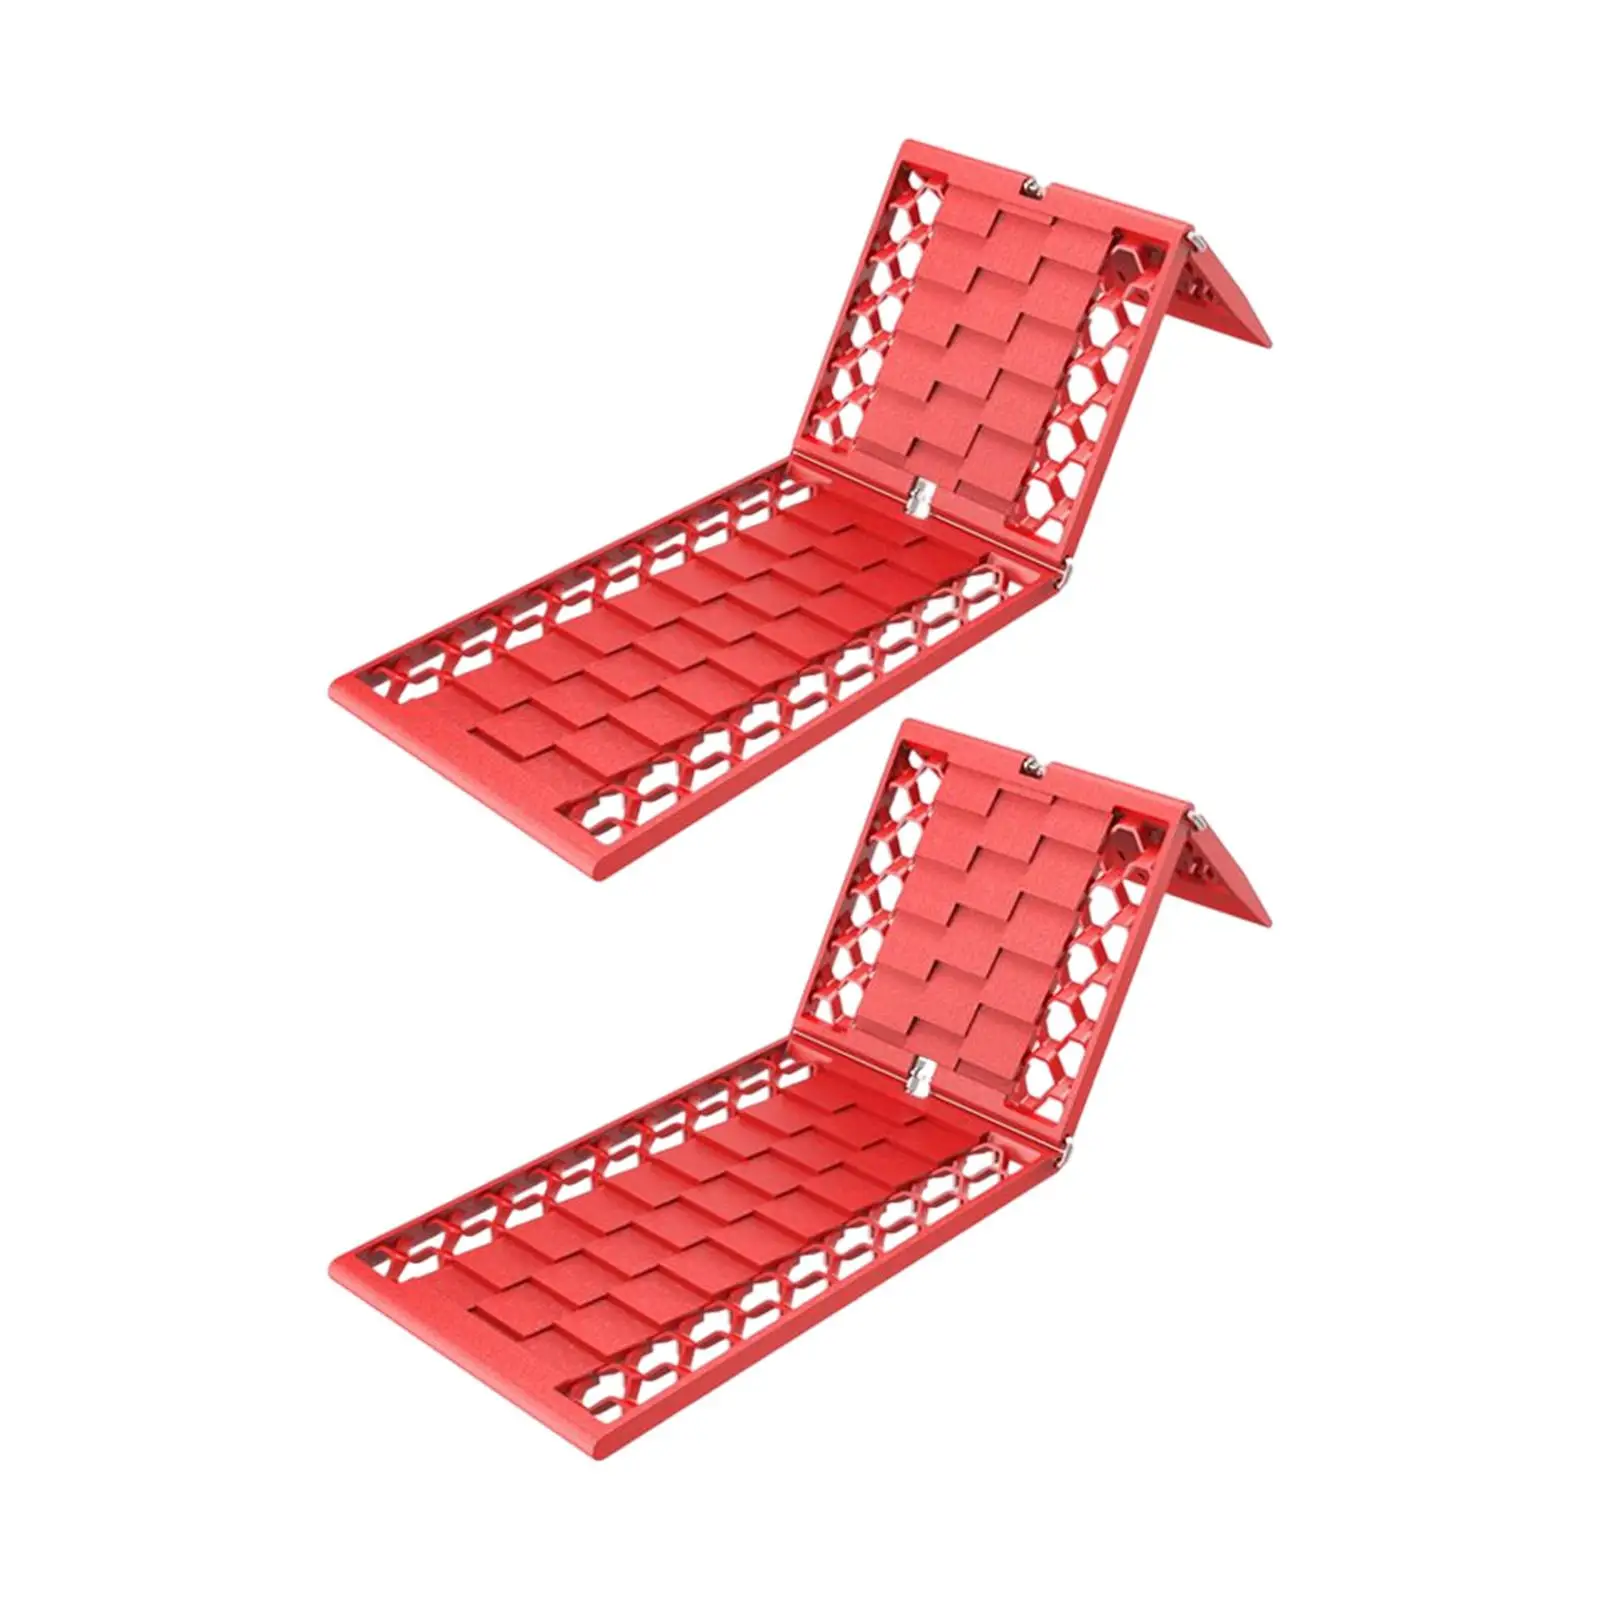 2Pcs Portable Traction Boards Tire Grip Grabber Off Roading Traction Track for